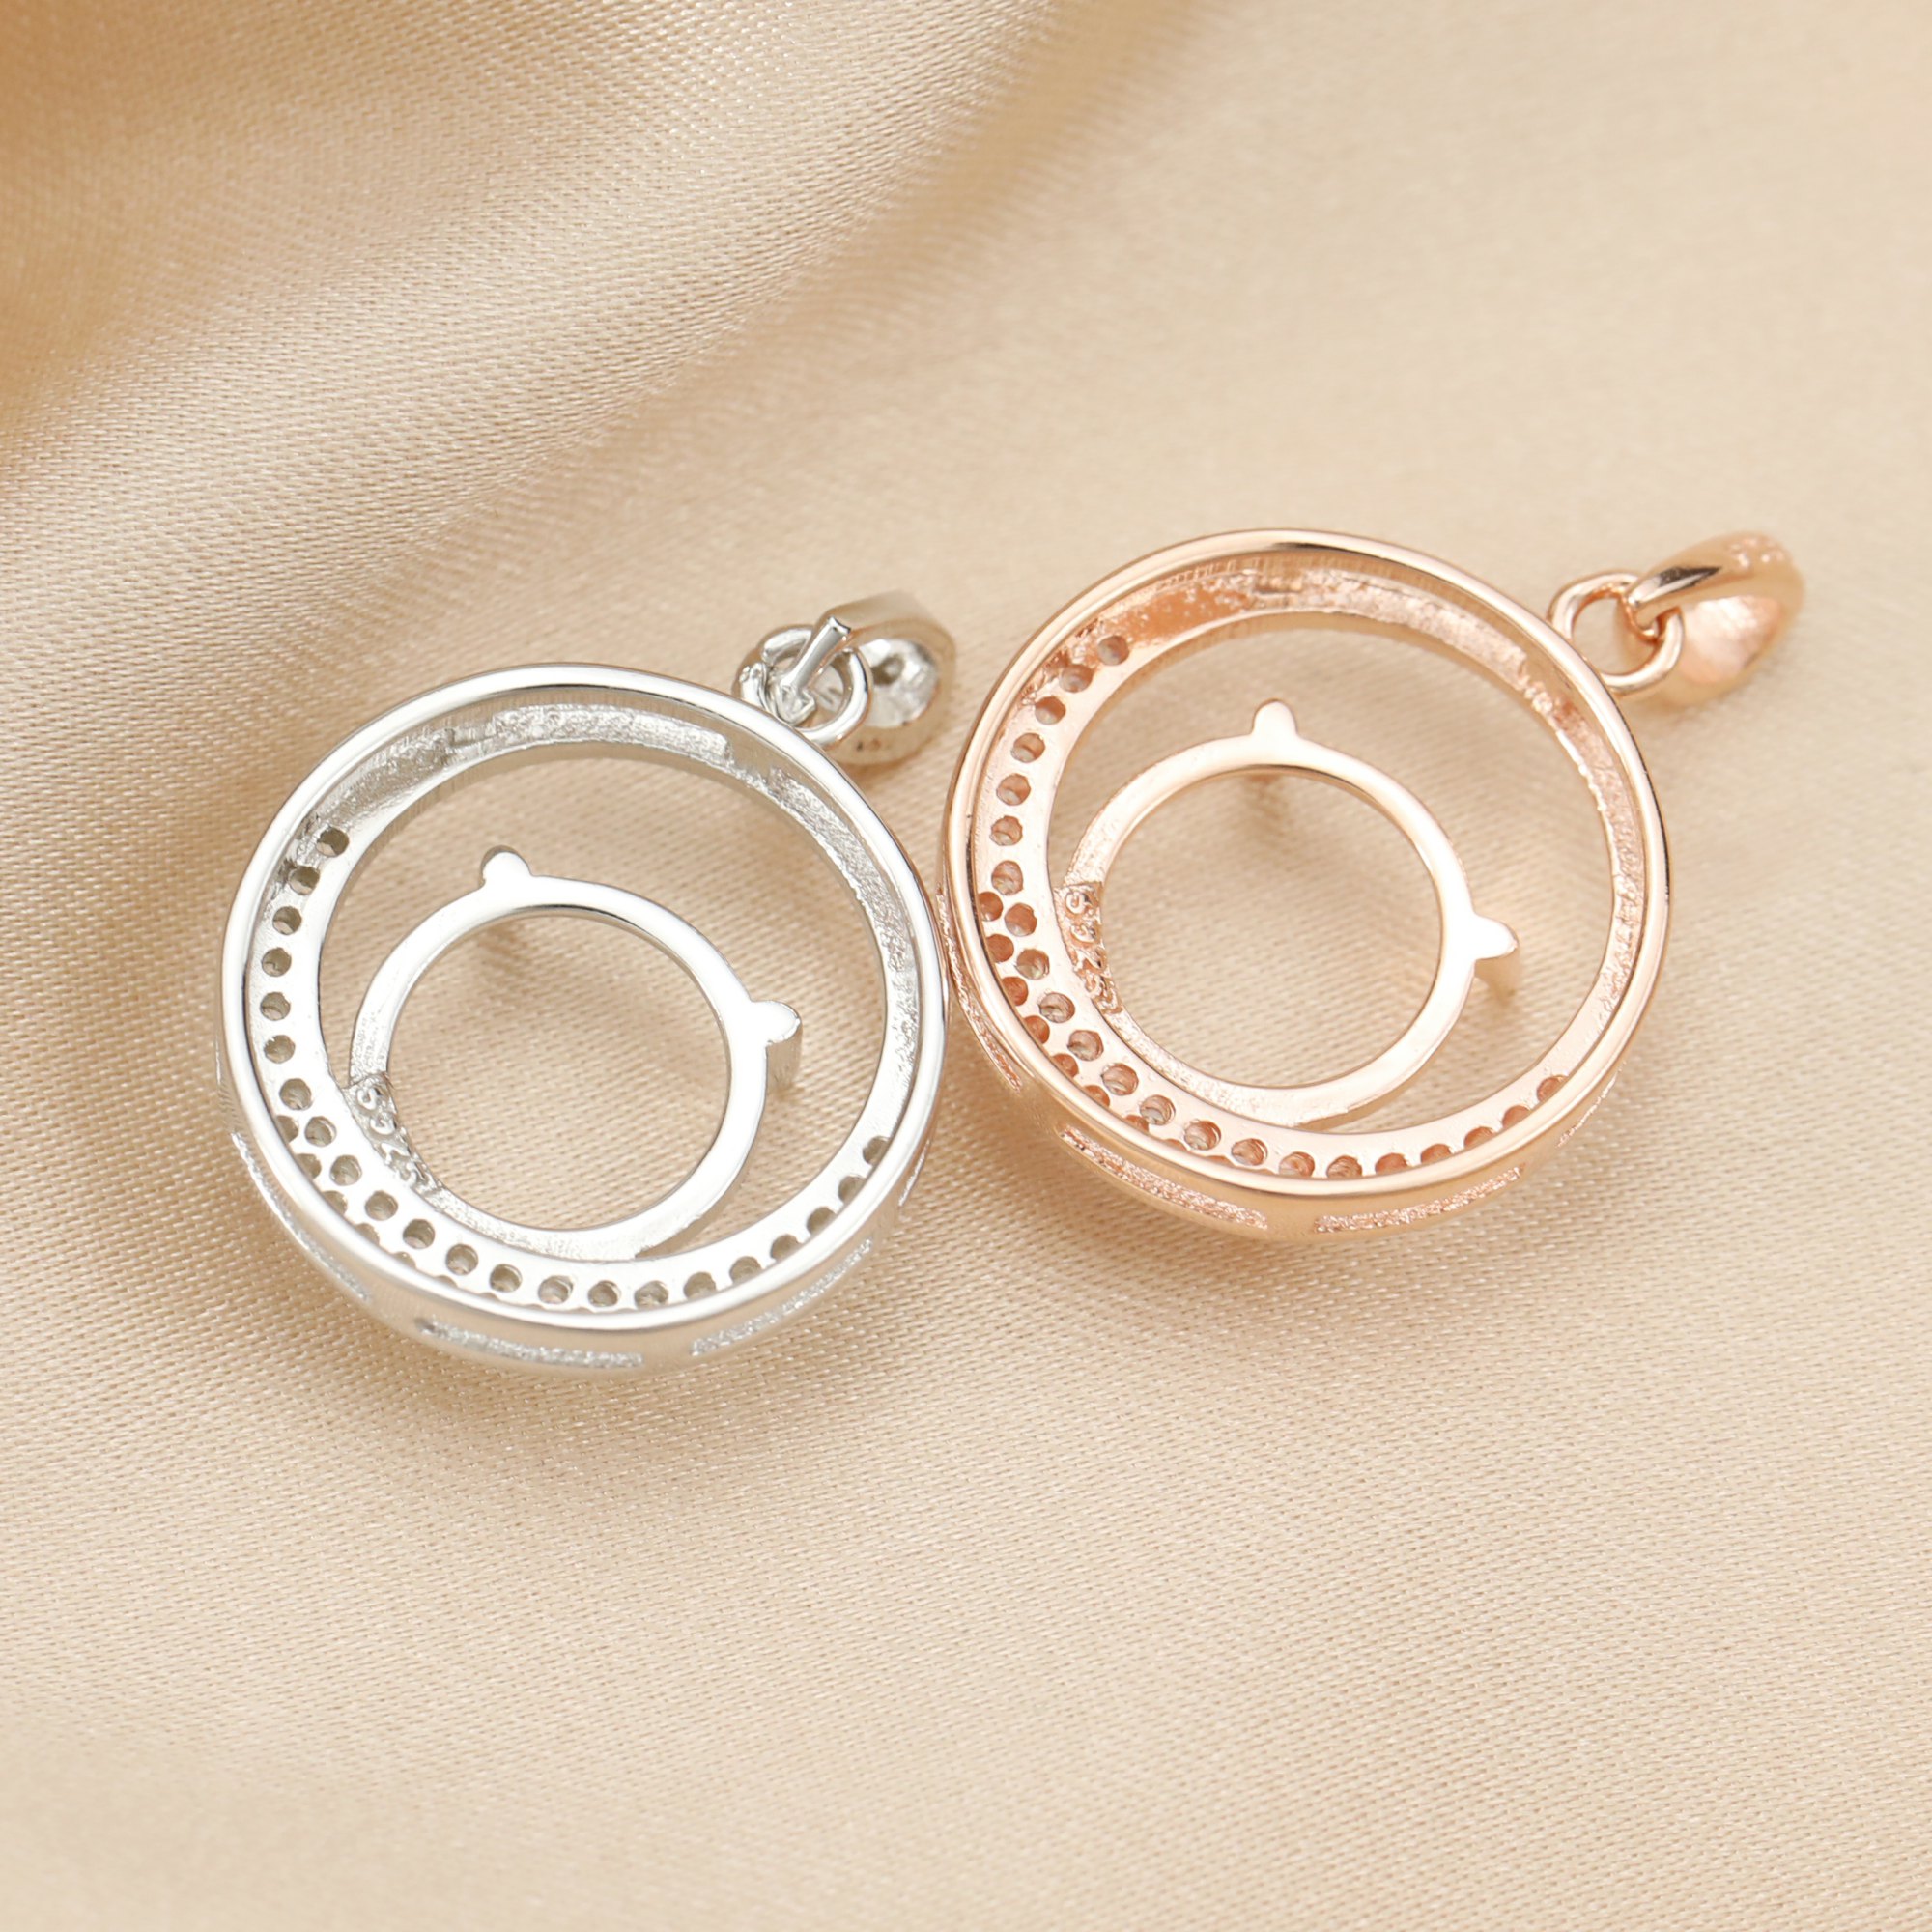 Keepsake Breast Milk Resin 10MM Round Prong Pendant Blank Bezel Settings Full Moon Rose Gold Plated Solid 925 Sterling Silver DIY Charm Supplies 1411299 - Click Image to Close